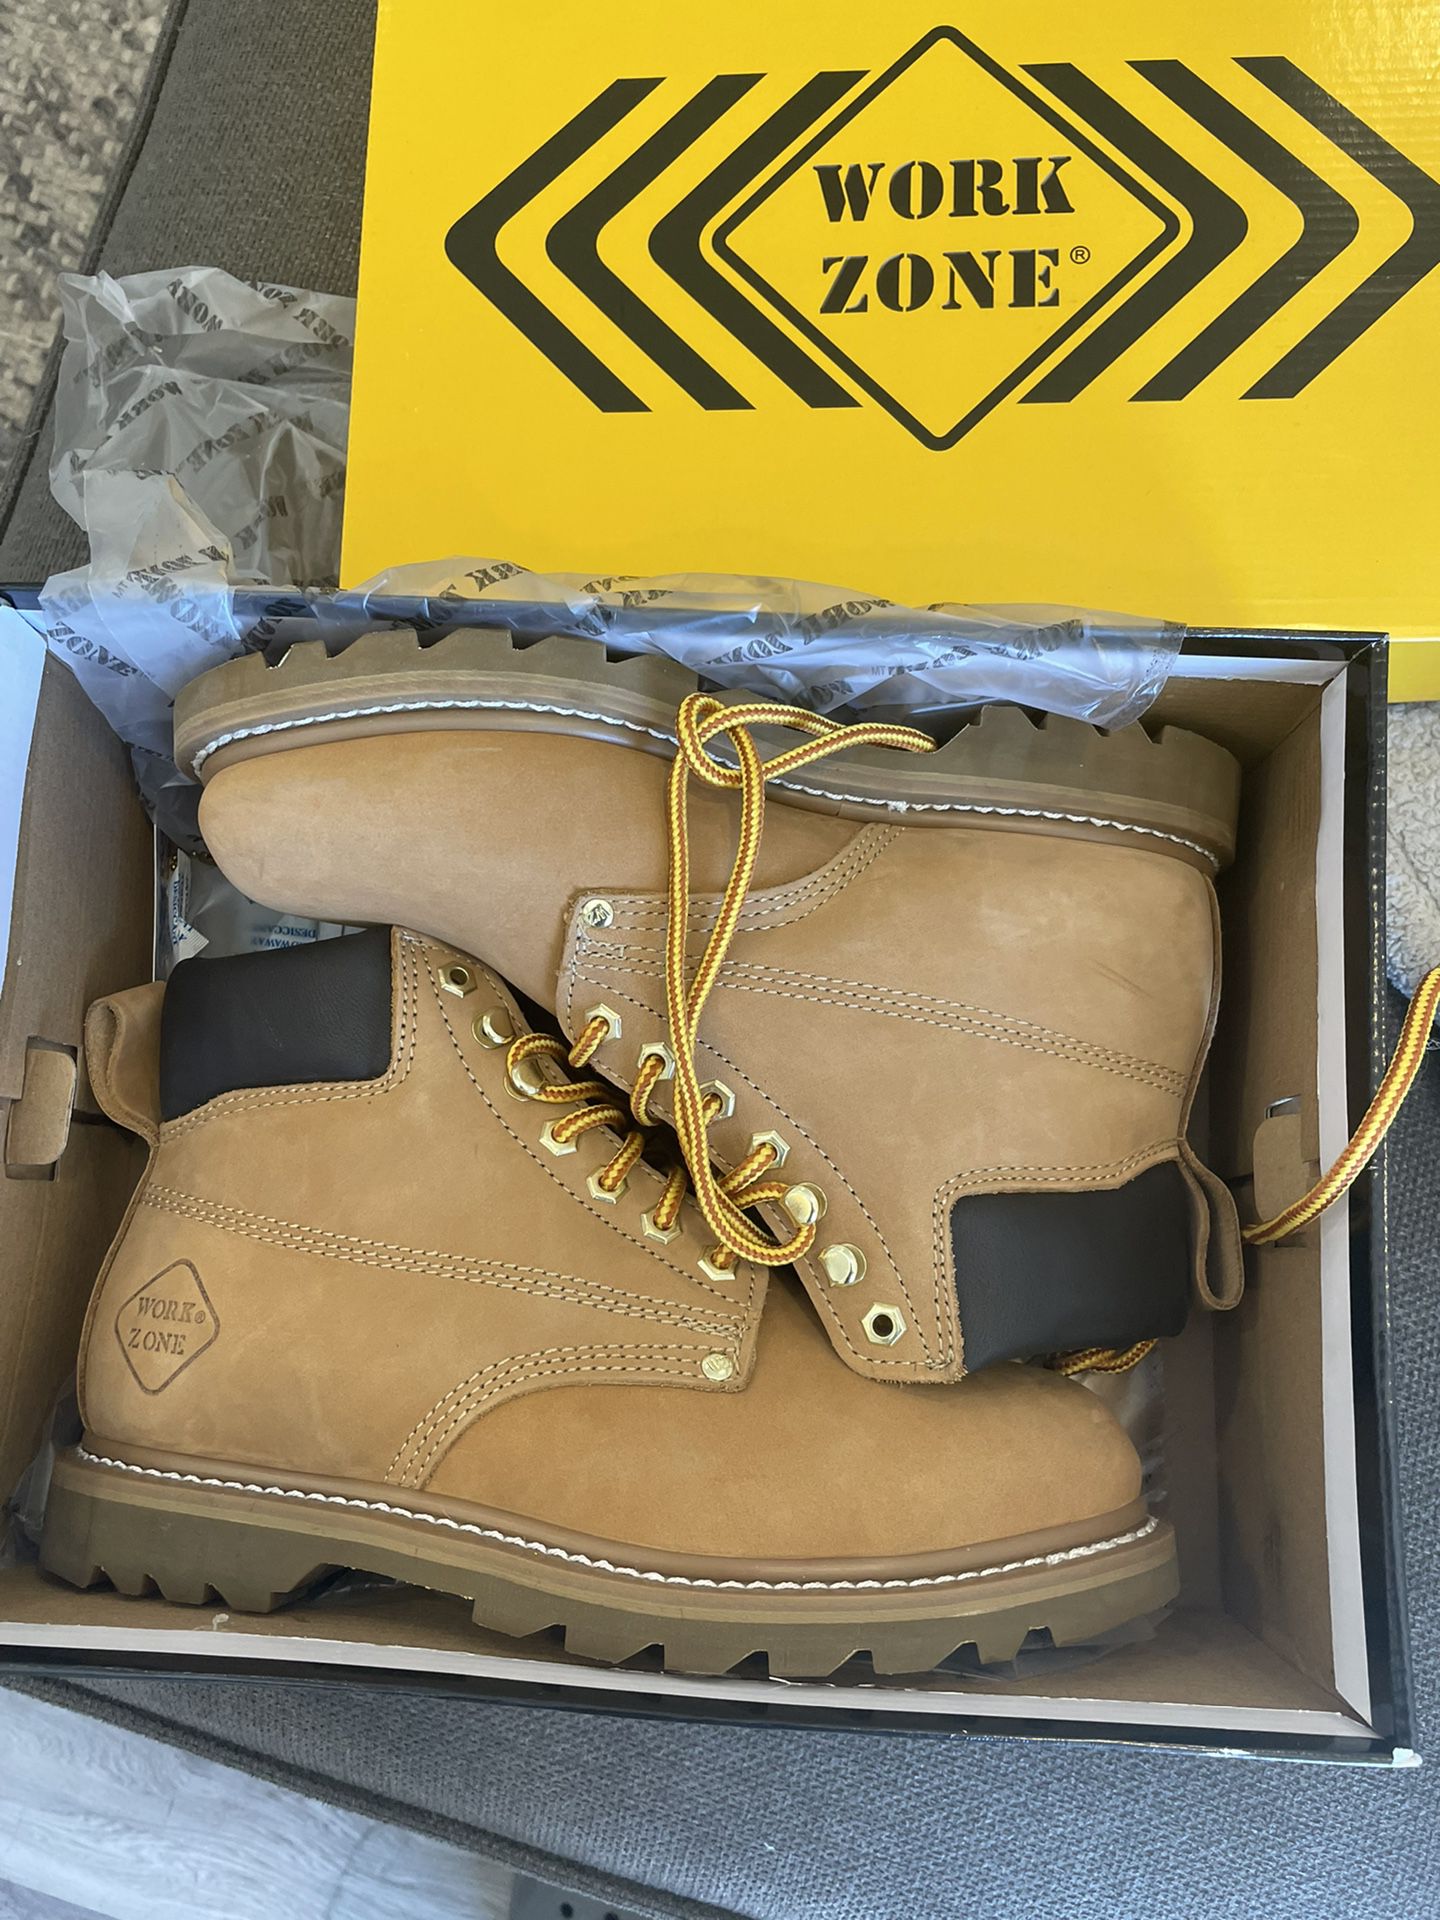 8.5 Work Boots 